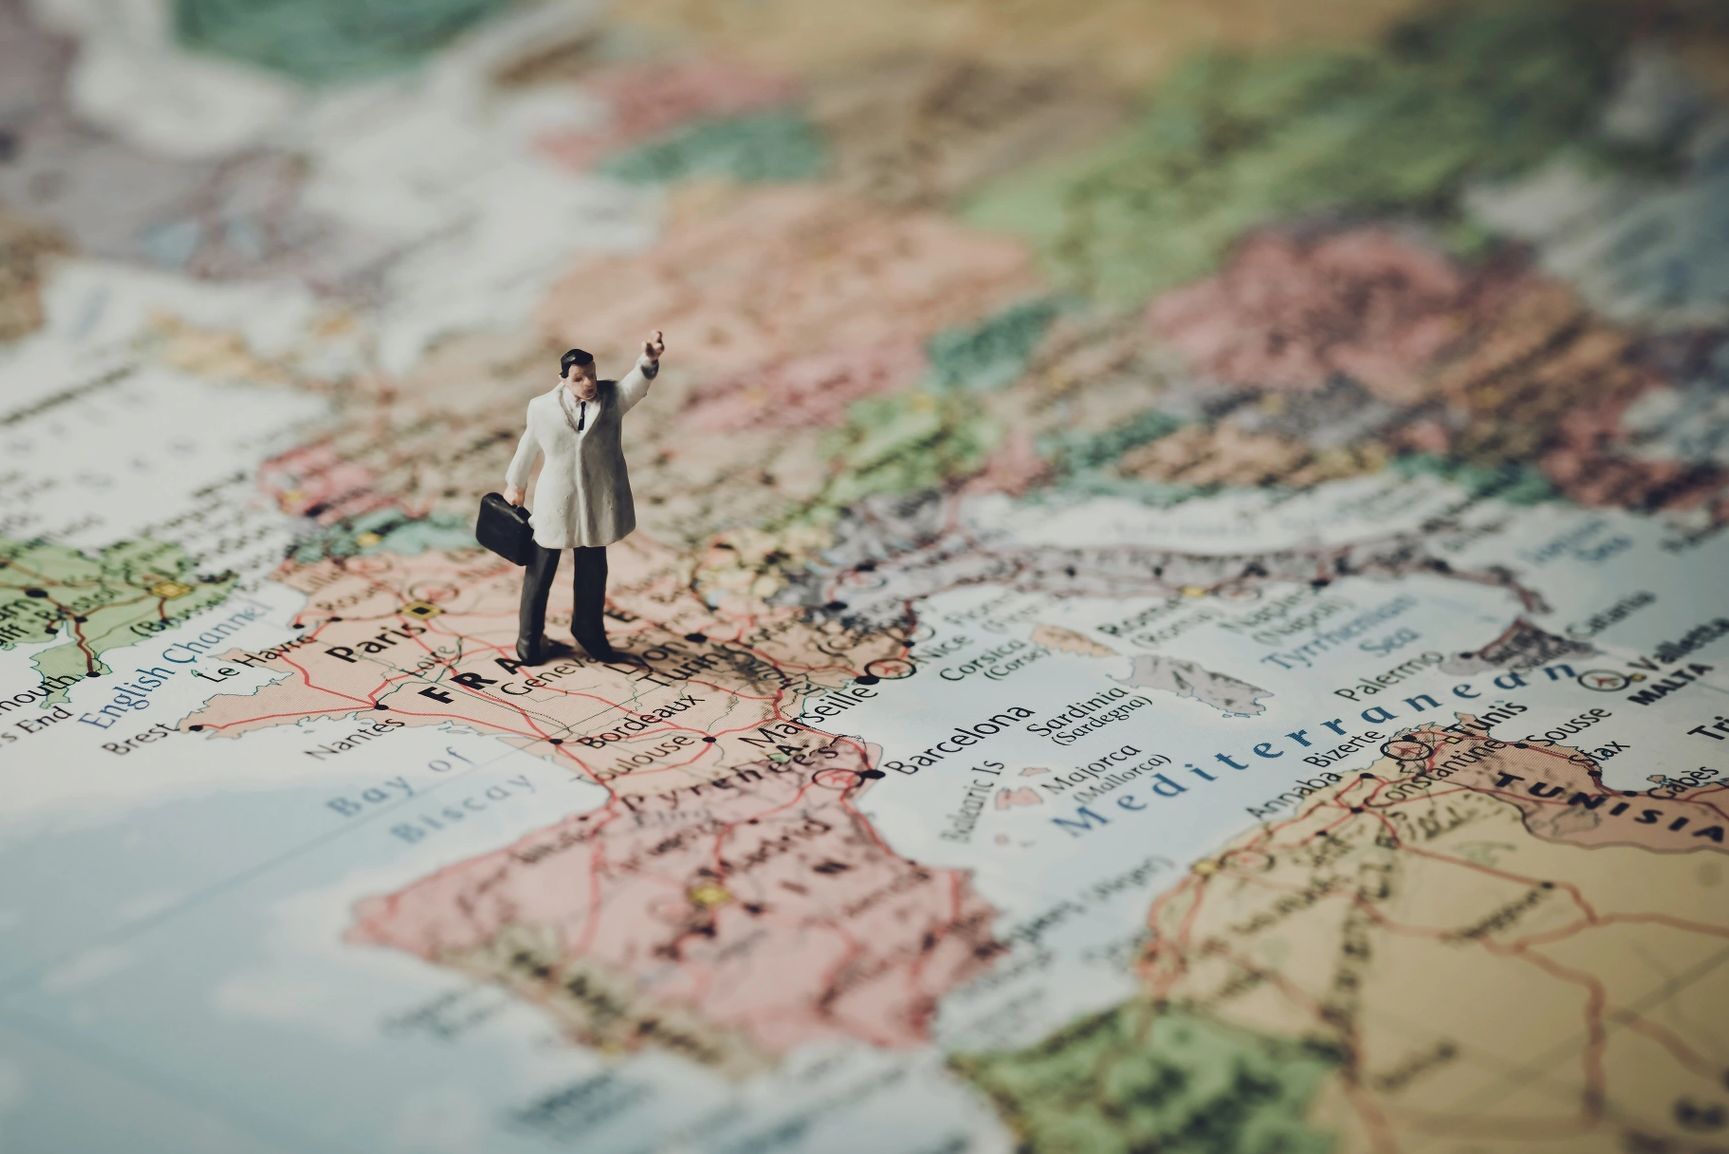 Small figure standing on map of Europe.